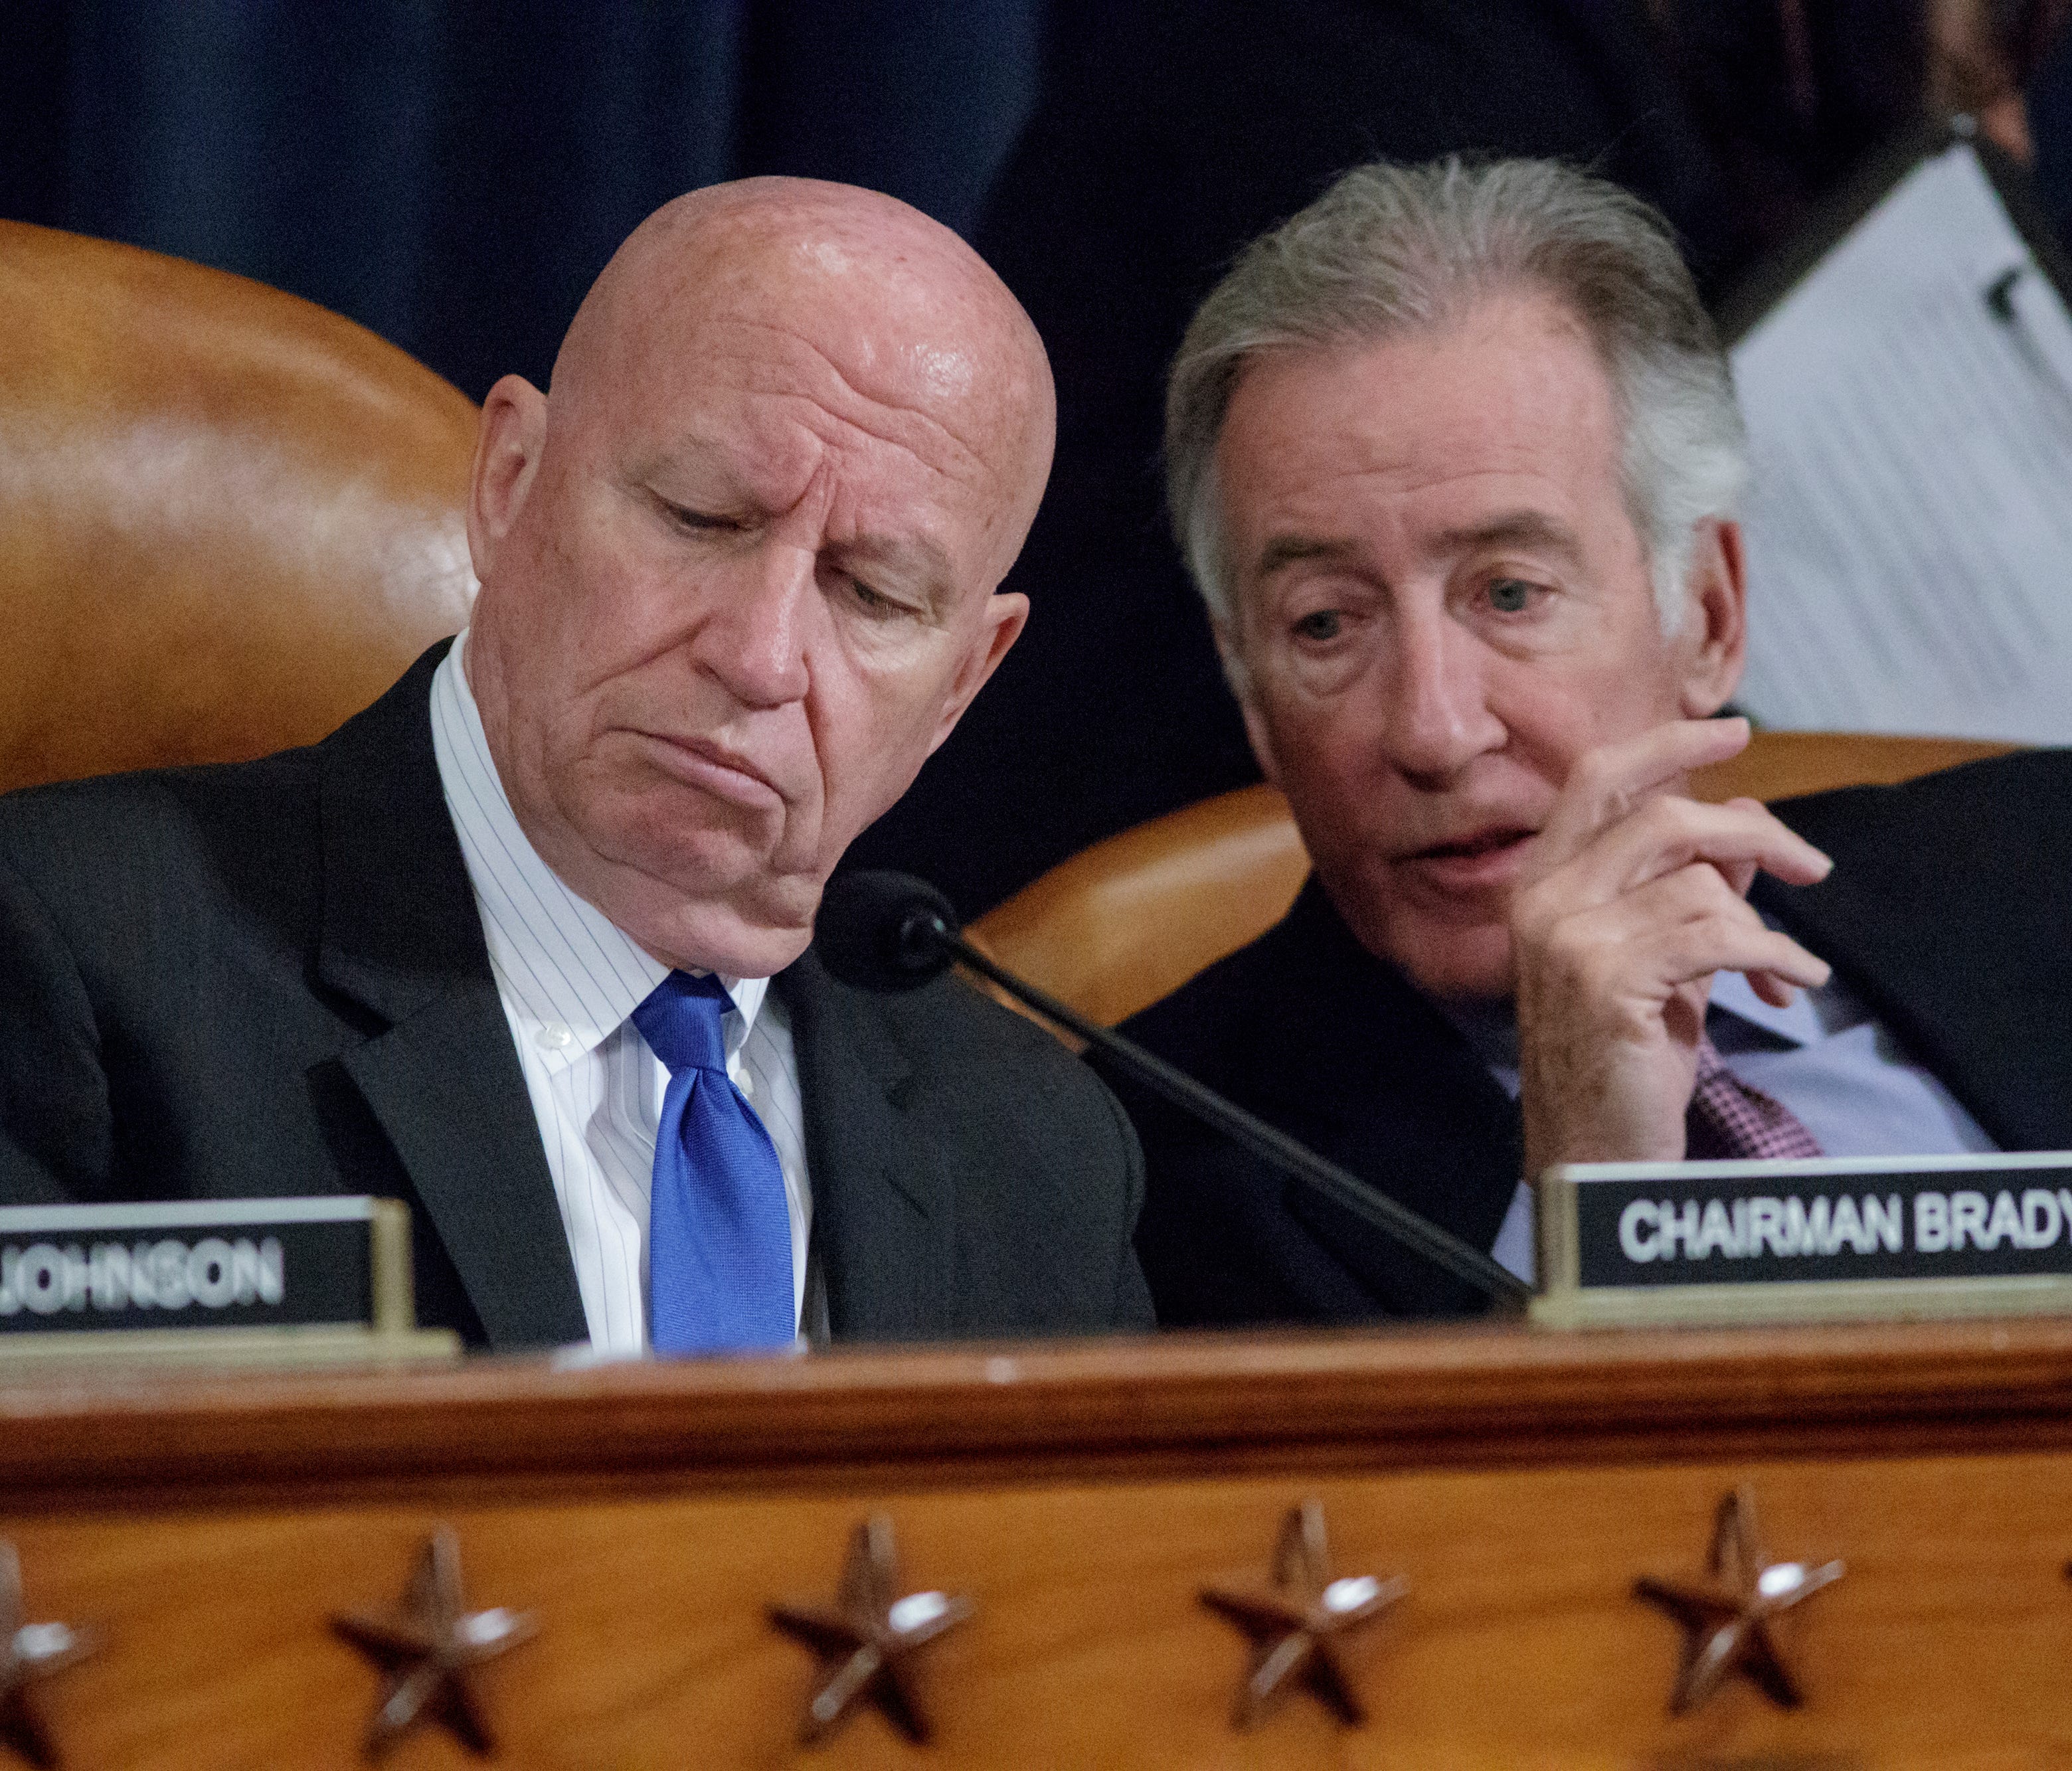 House Ways and Means Committee Chairman Rep. Kevin Brady, R-Texas, left, listens to the committee's ranking member, Rep. Richard Neal, D-Mass., on Capitol Hill in Washington, Wednesday, March 8, 2017, as the committee began markup of the long-awaited